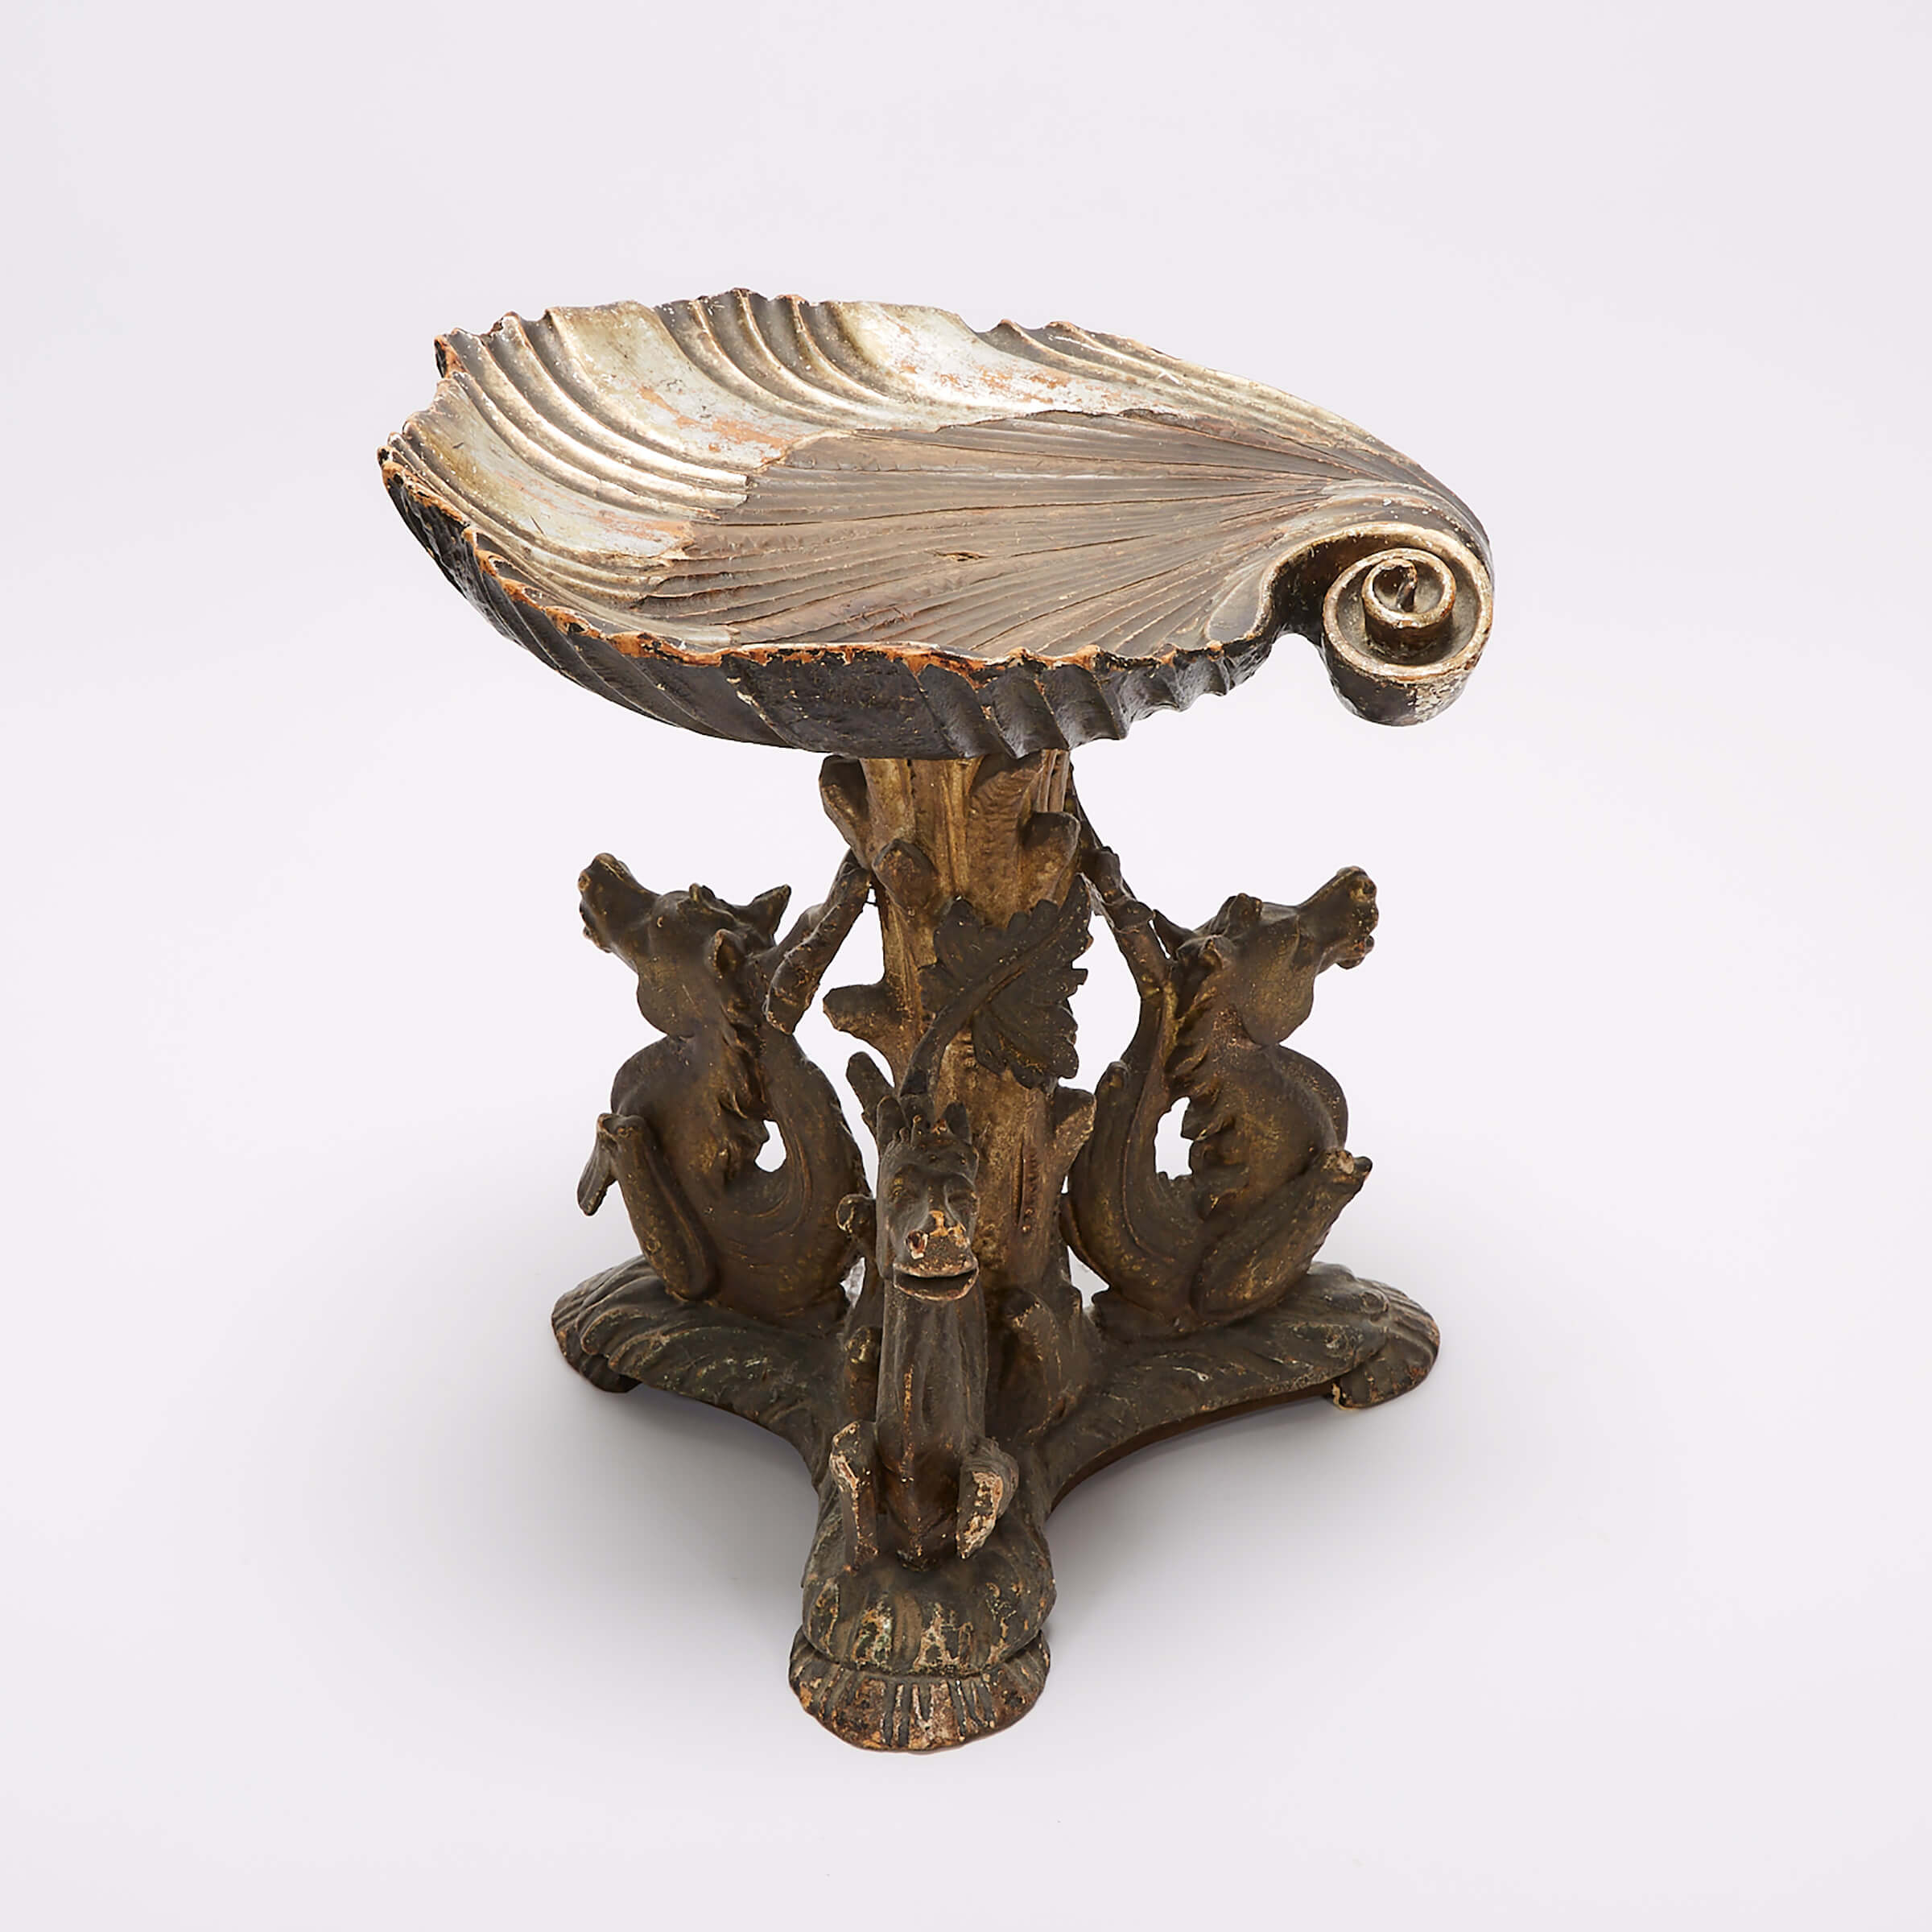 Venetian Carved, Silvered and Gilt Wood Grotto Stool, late 19th century